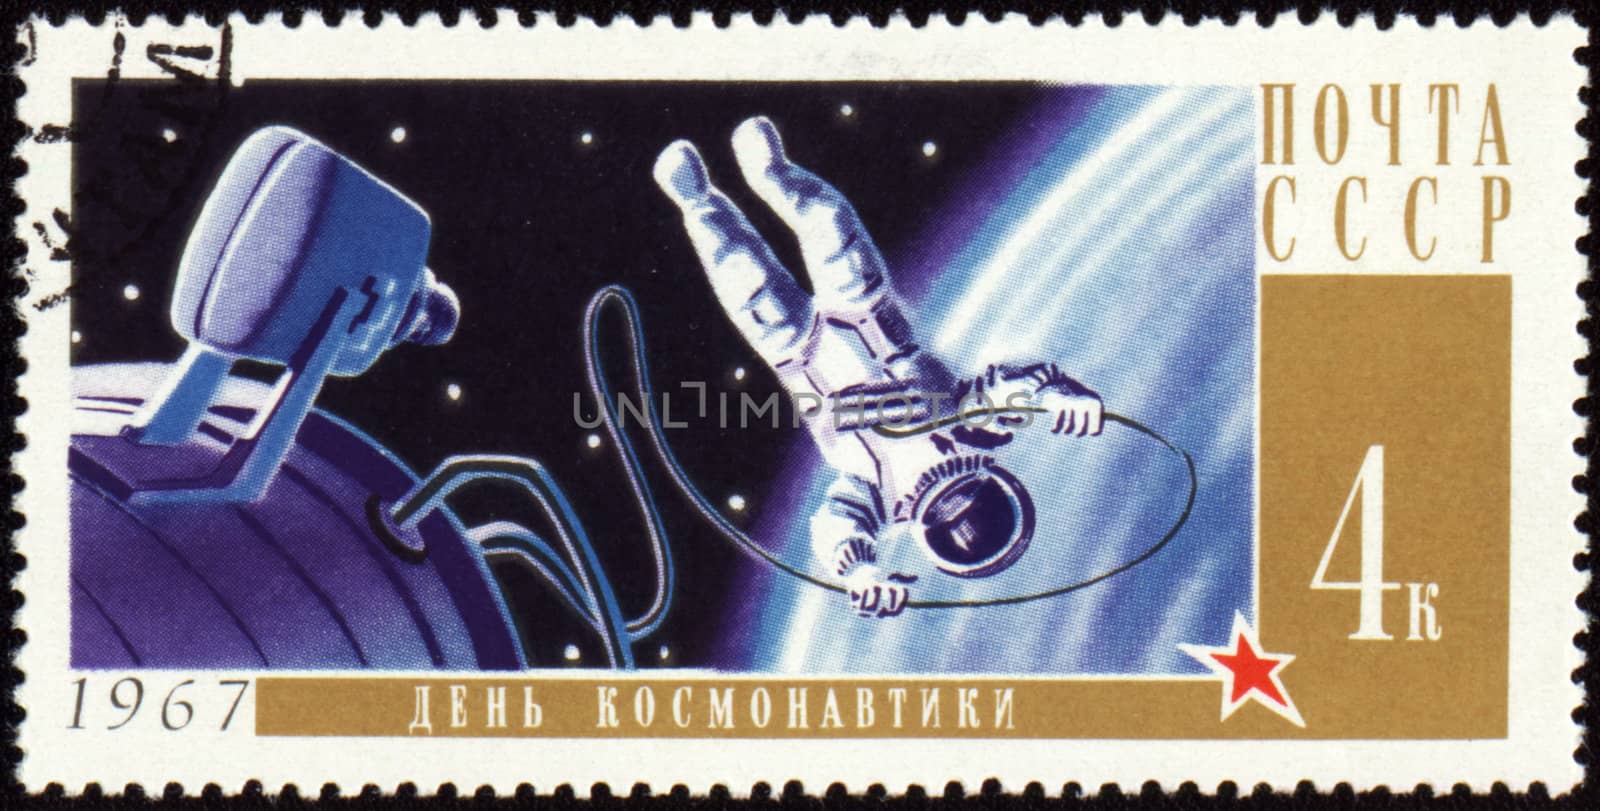 Postage stamp with Cosmonaut in open space by wander